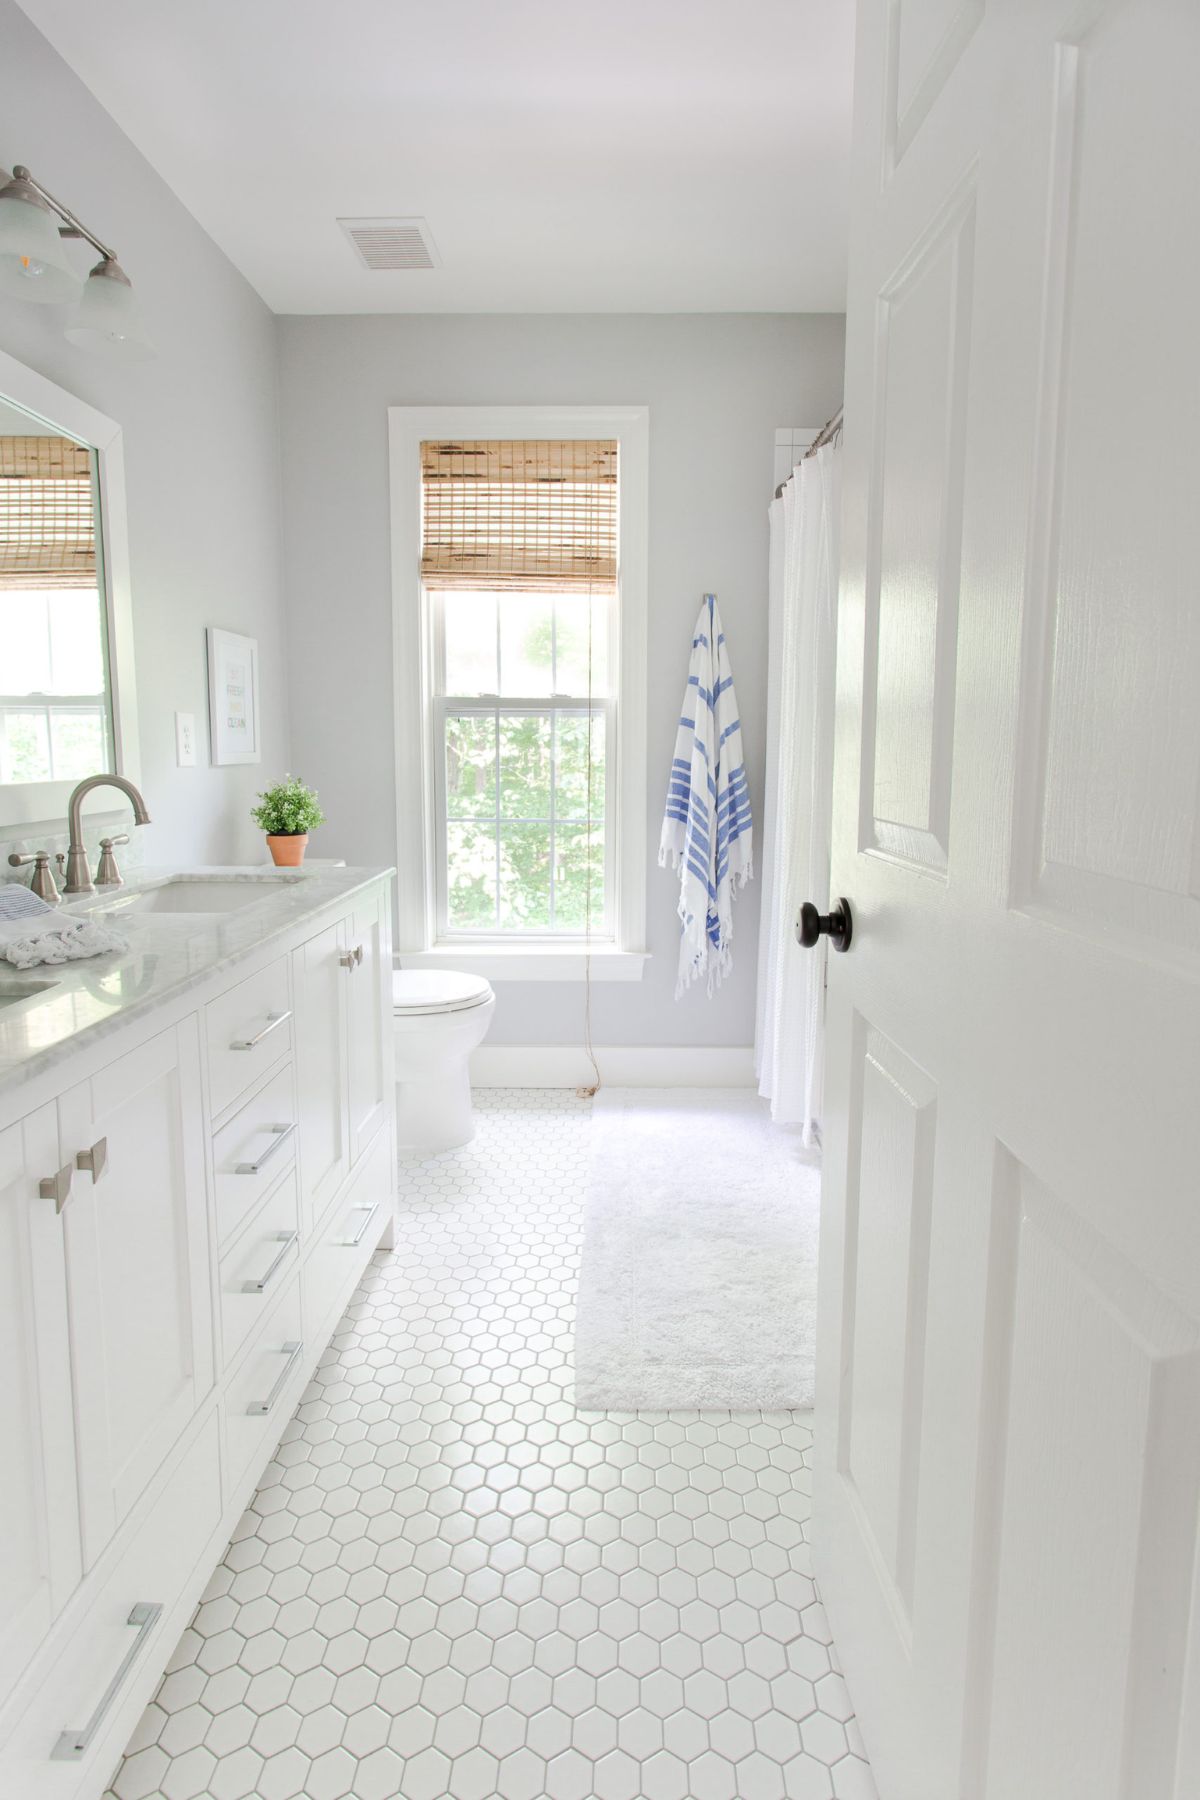 A very clean looking bathroom with a large window and white fixtures.